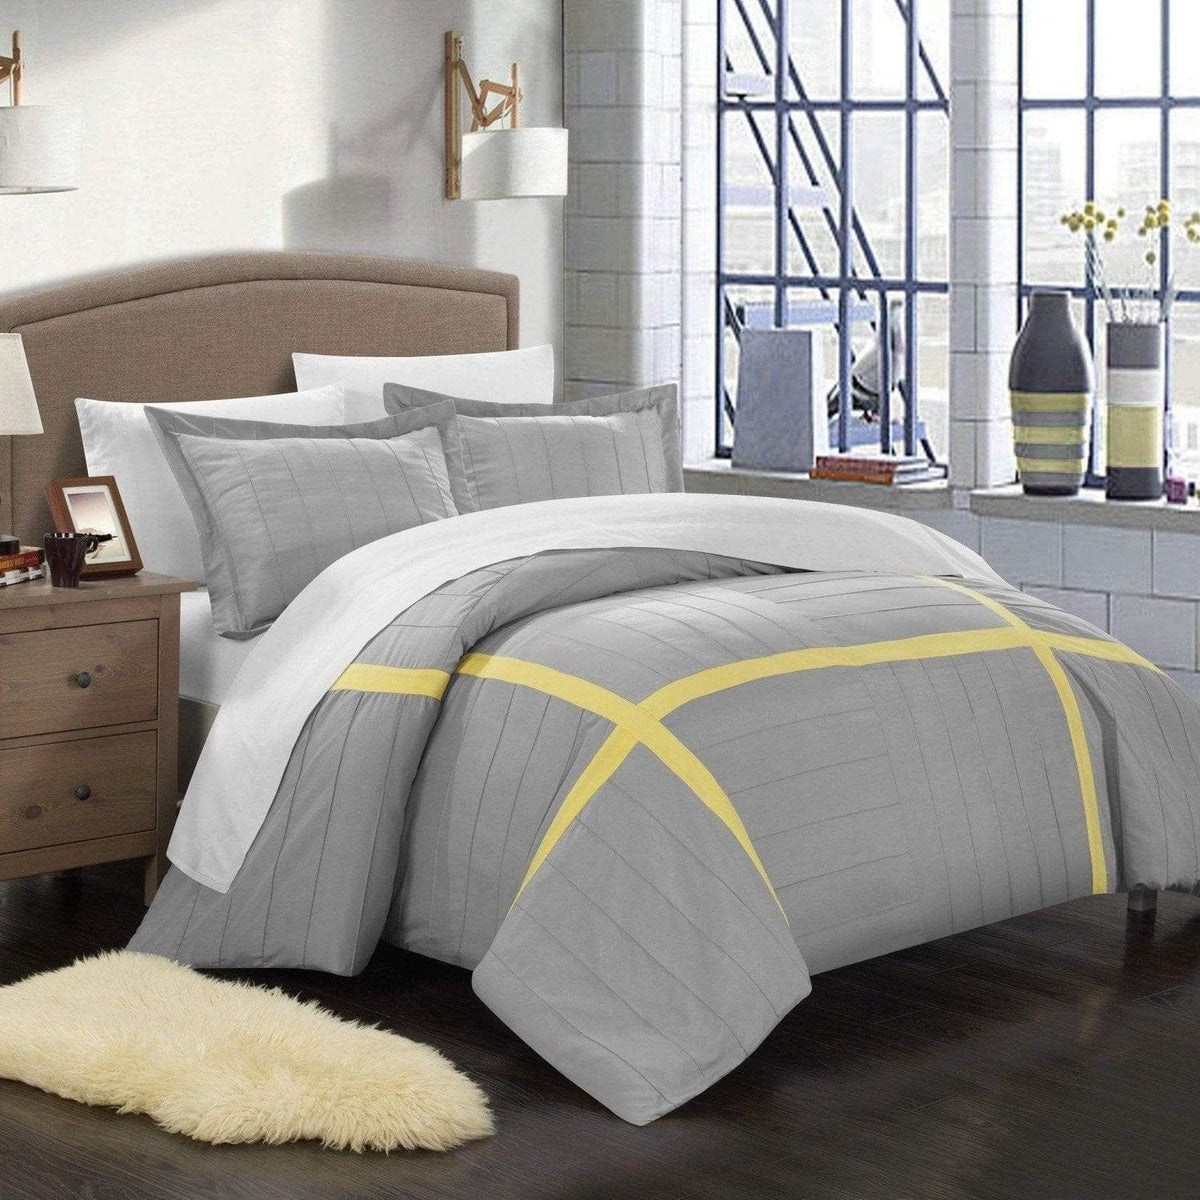 Chic Home Giselle 3 Piece Patchwork Duvet Cover Set Grey